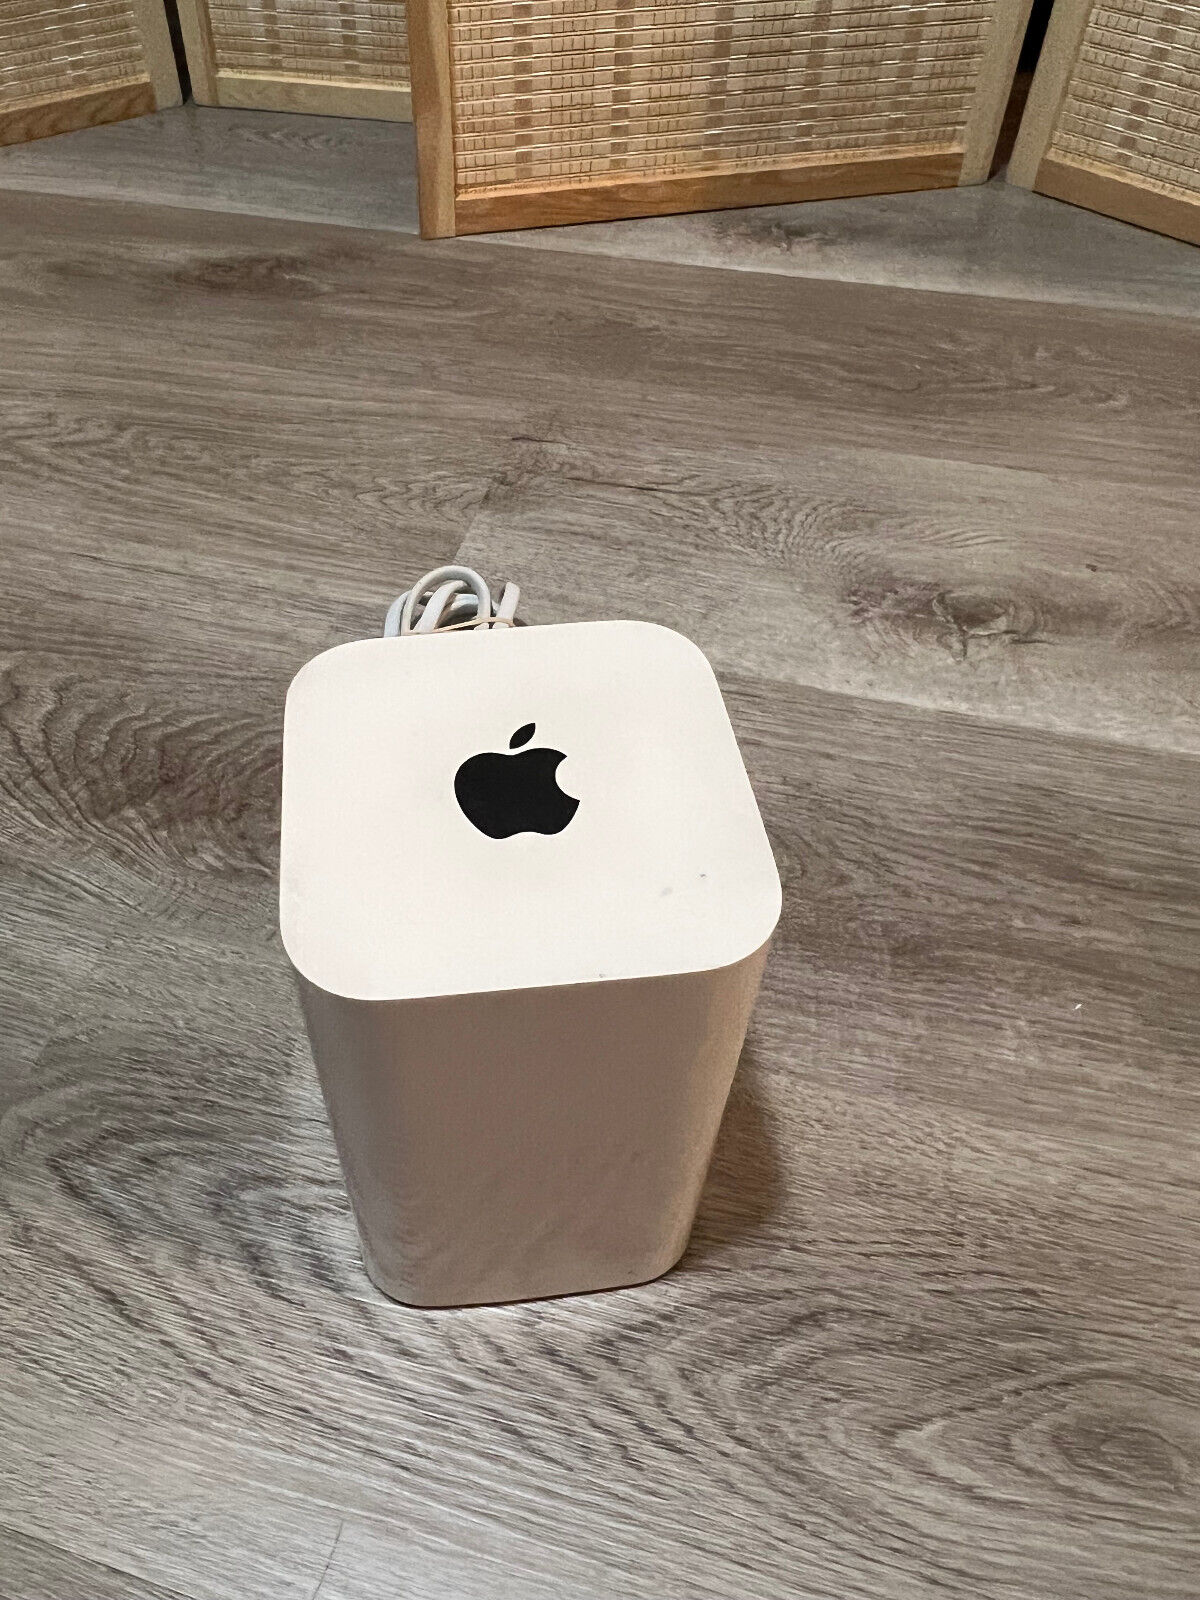 Apple A1470 AirPort Time Capsule wireless Router 2TB With Power Cord